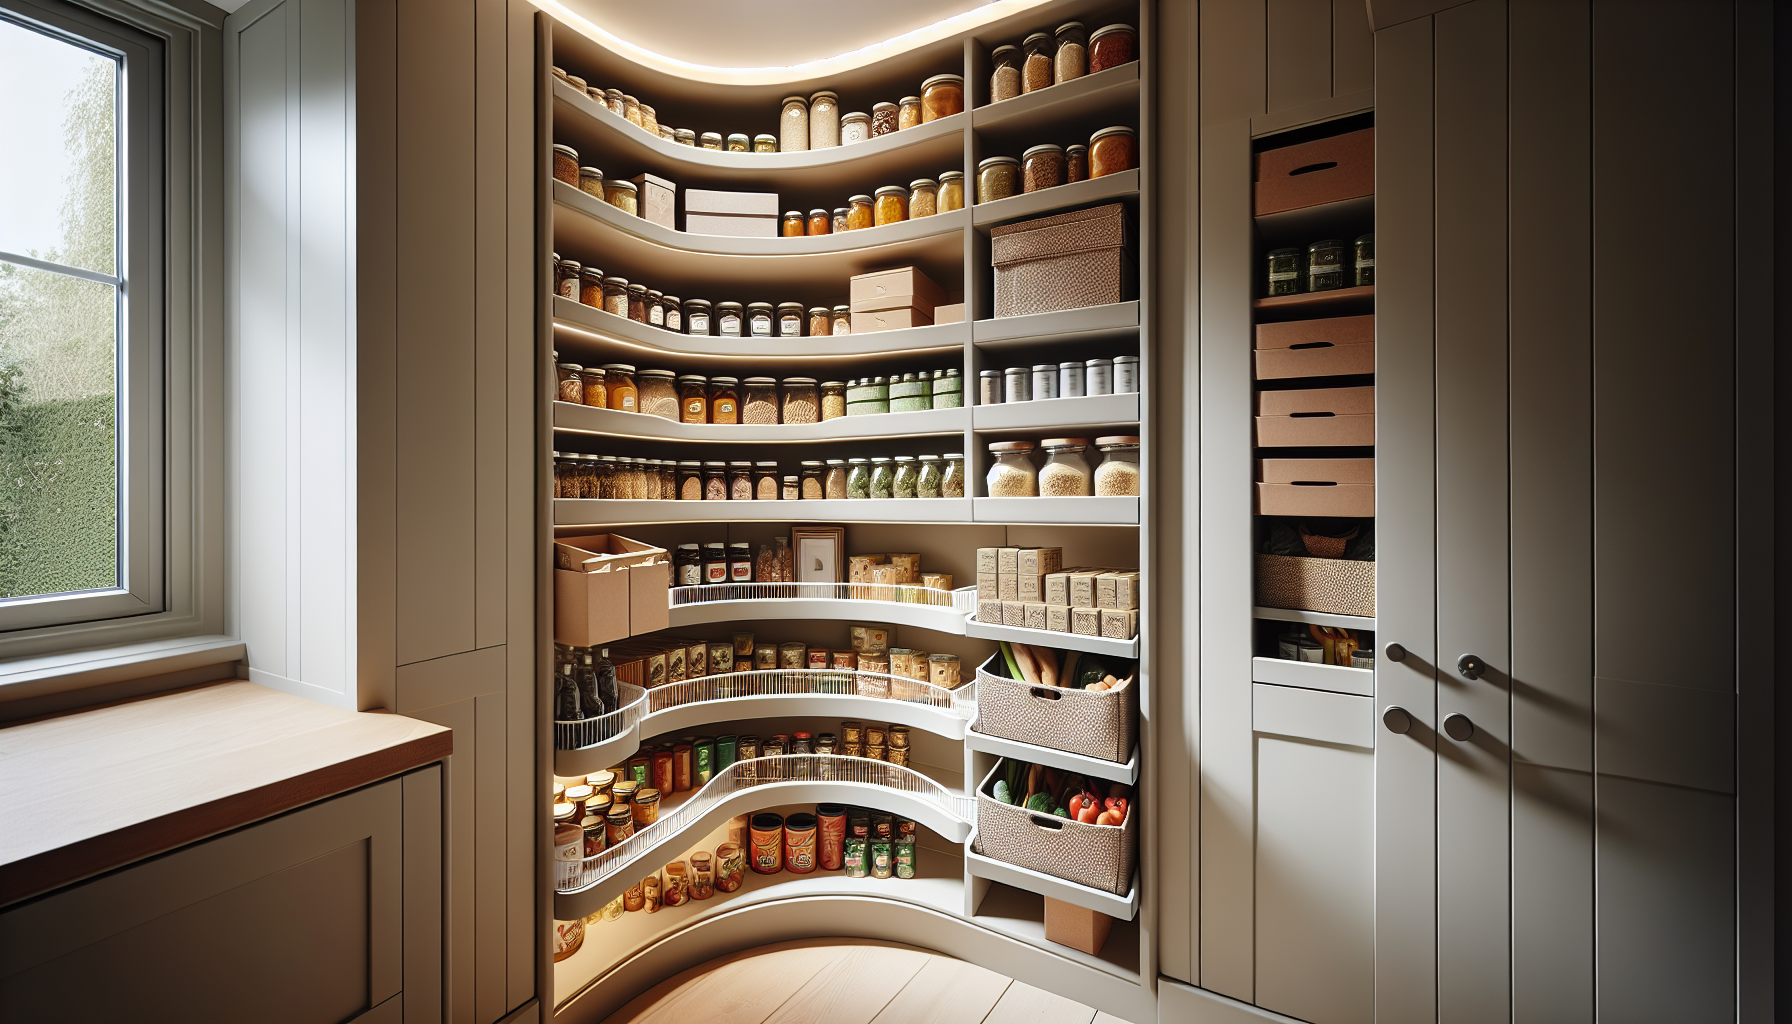 Clever corner solutions for pantry storage